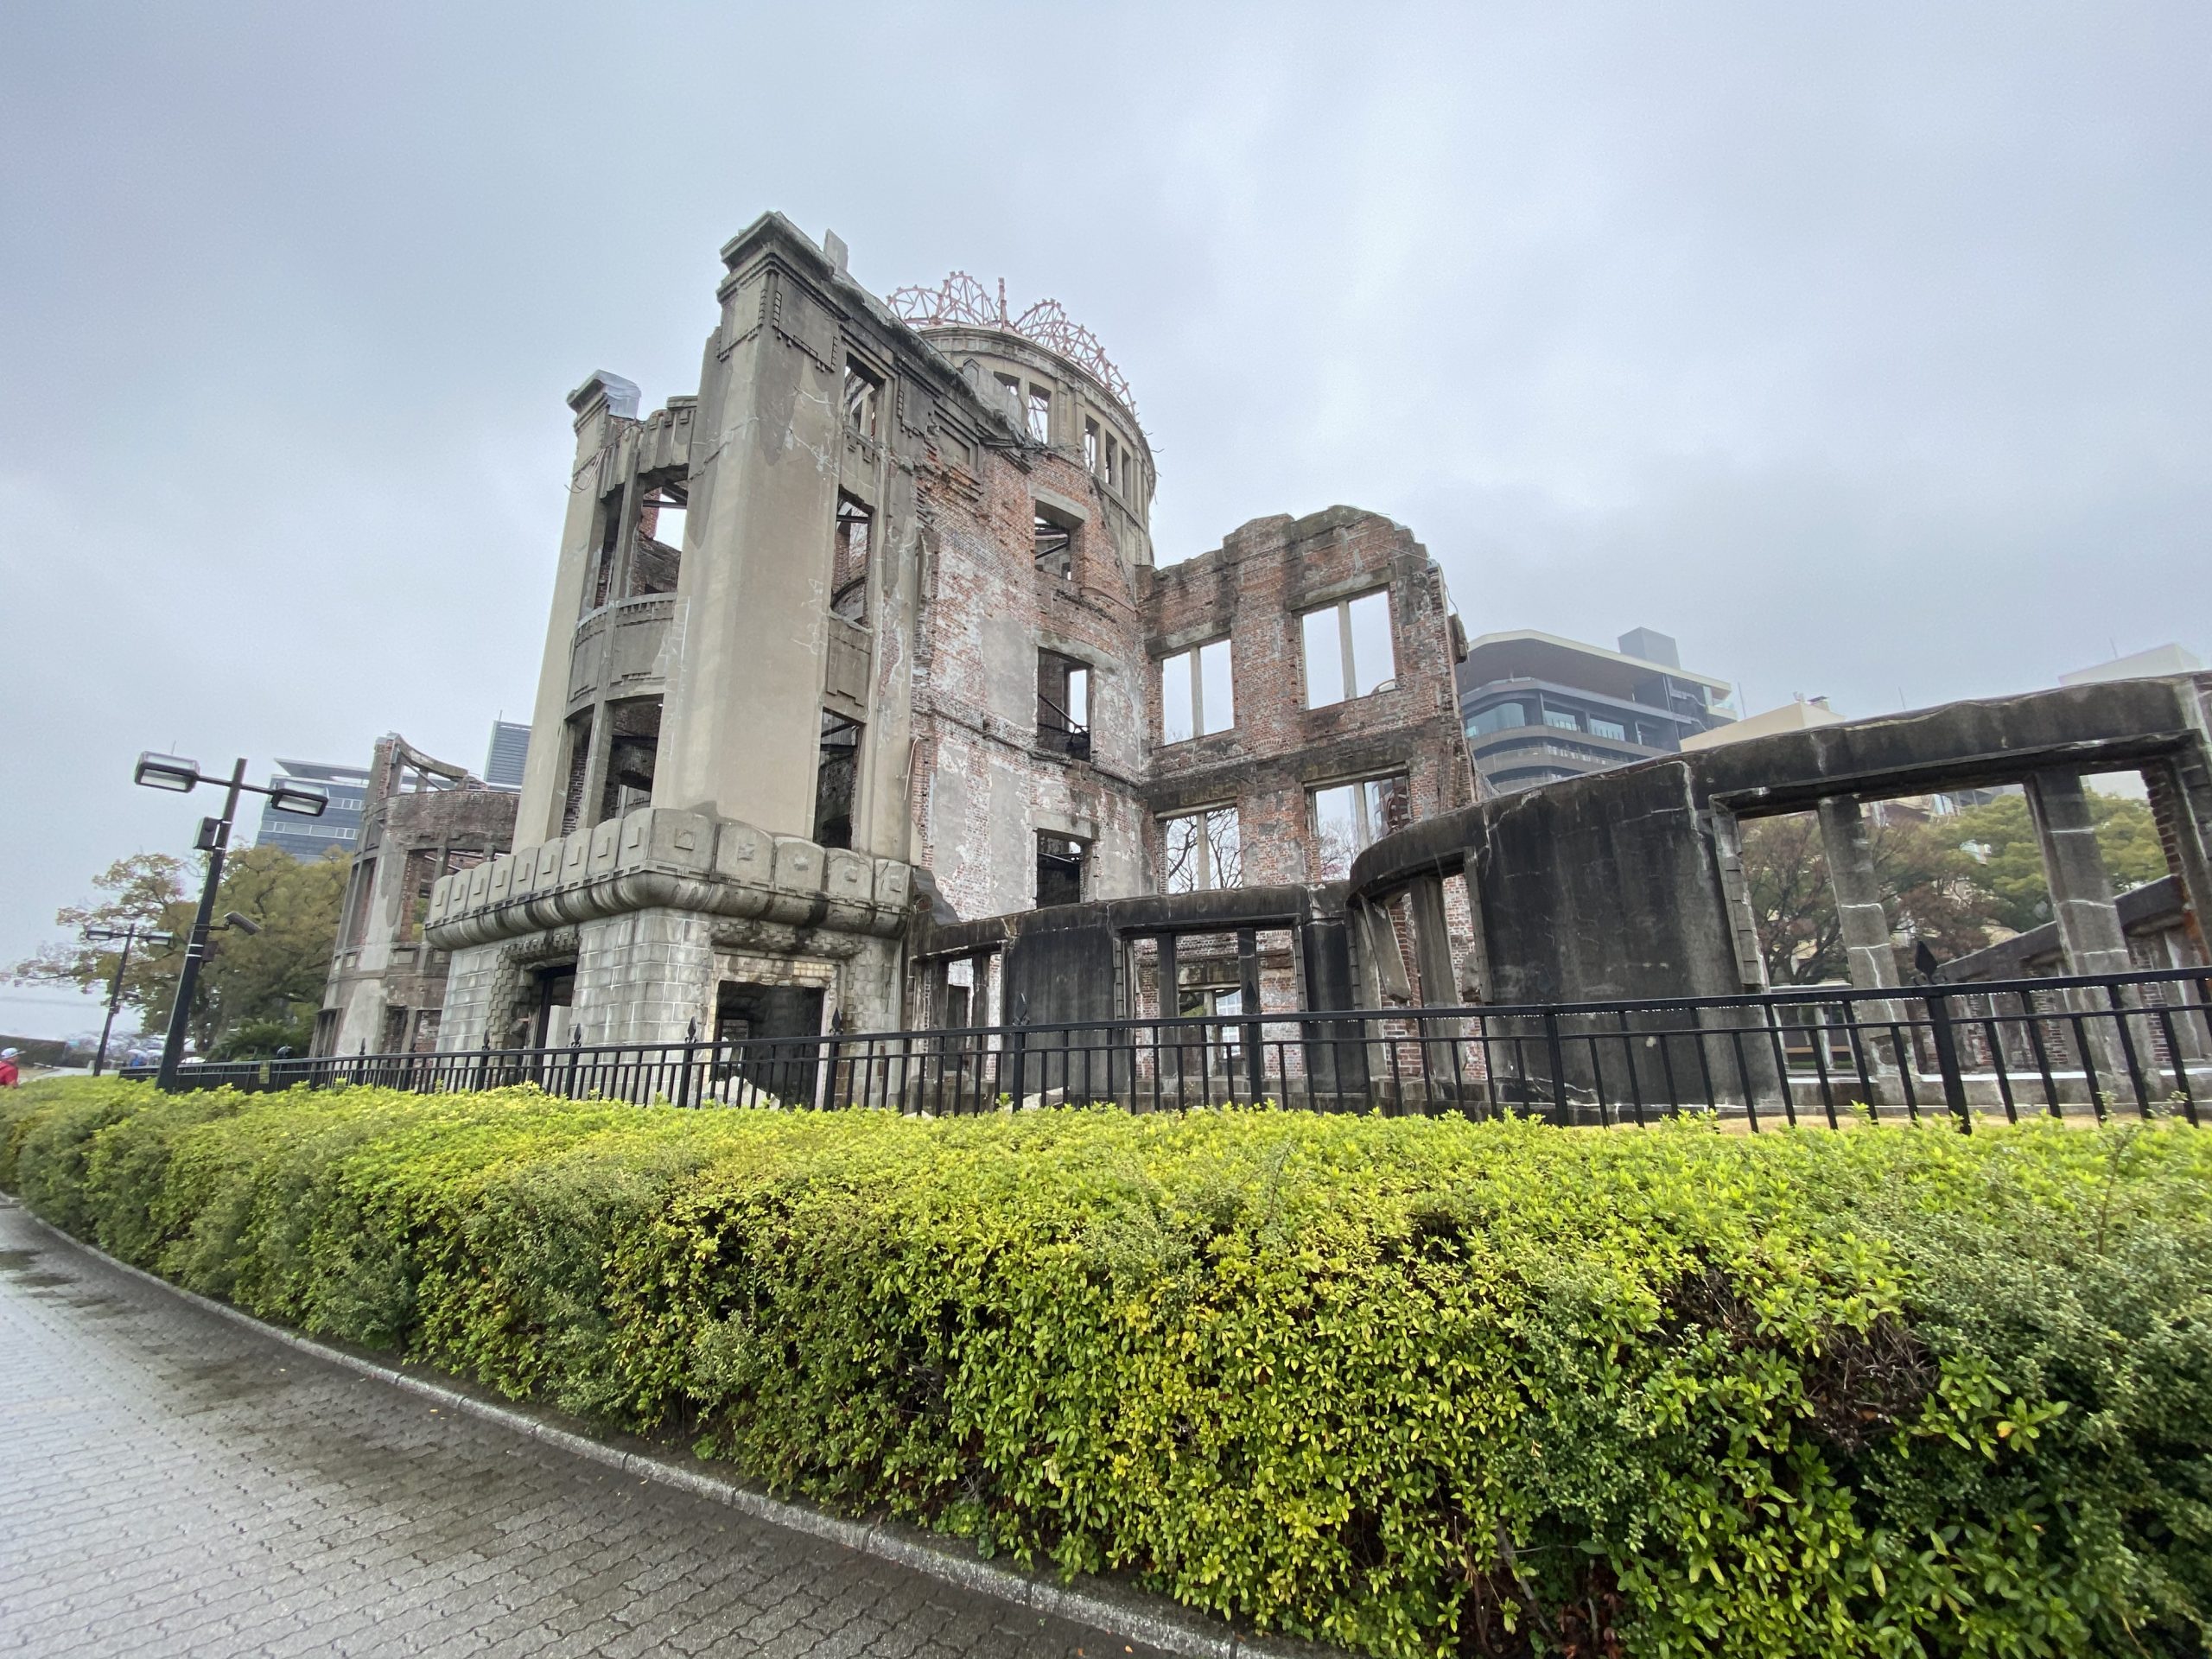 Ruins of the last standing building from pre-atomic bomb Hiroshima